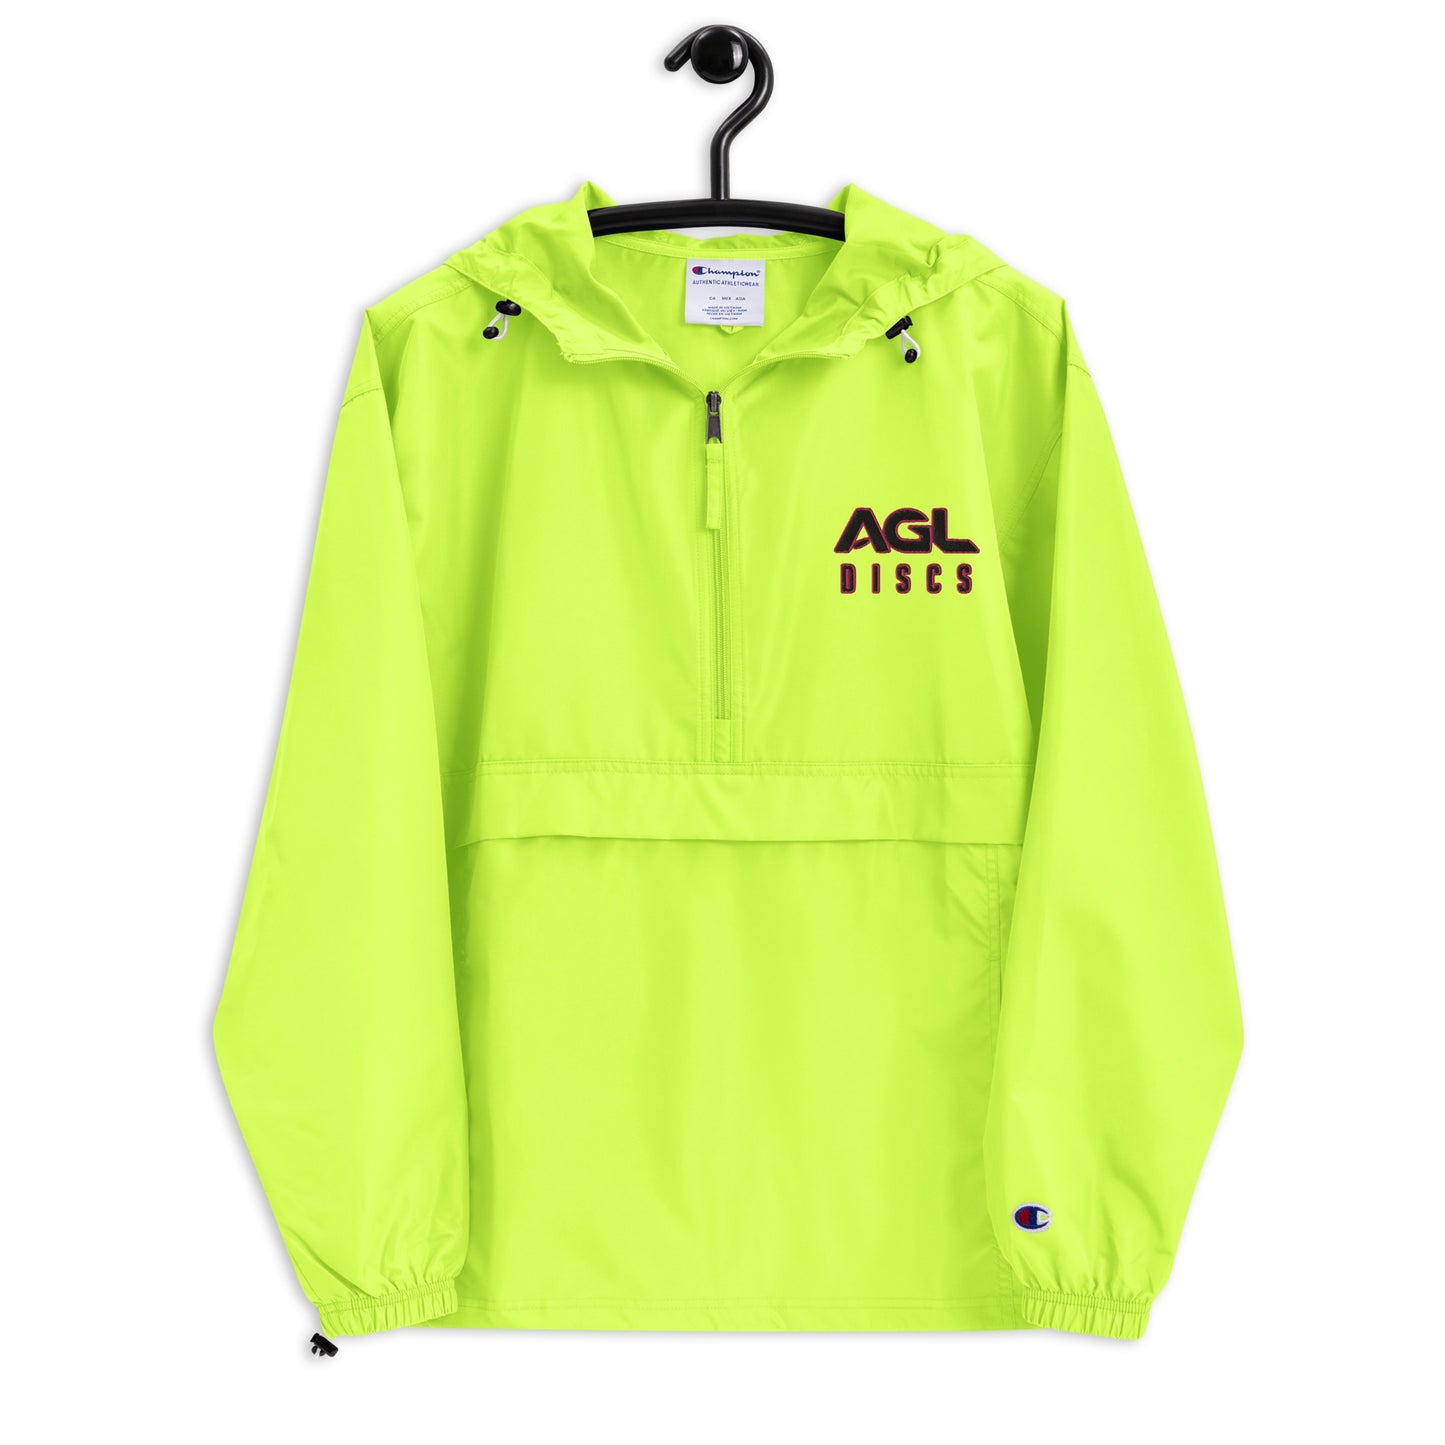 AGL Discs - Embroidered Champion Packable Jacket